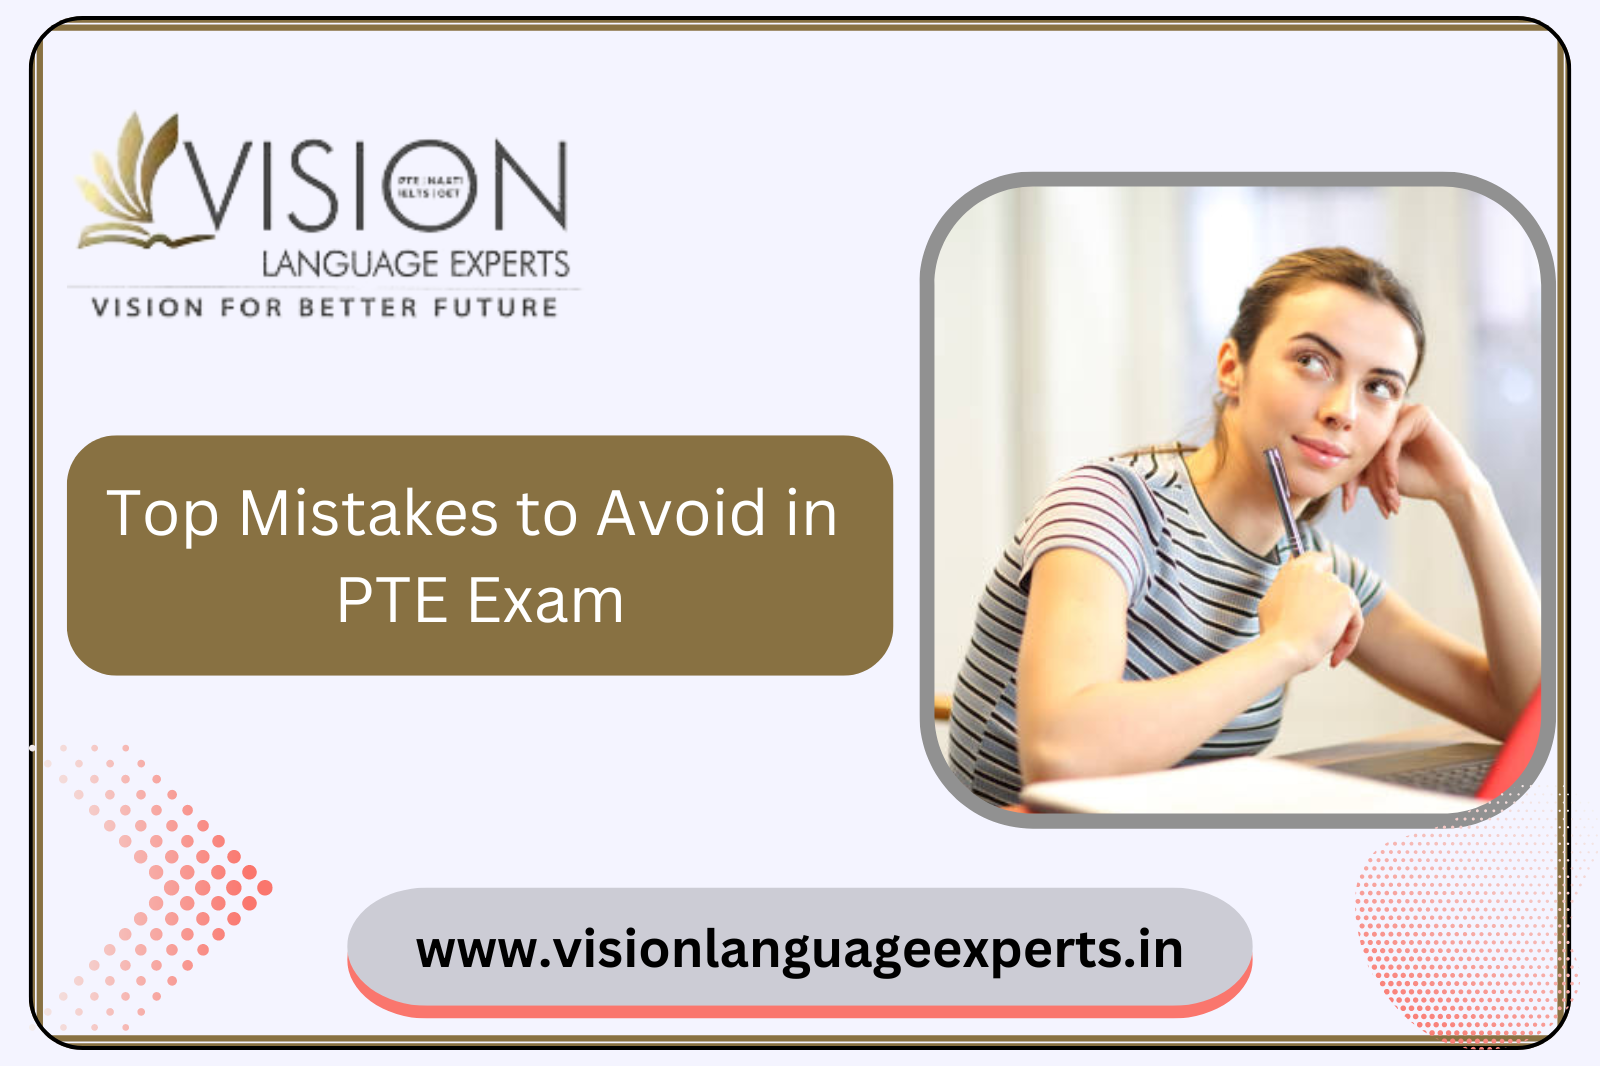 Top Mistakes to Avoid in PTE Exam